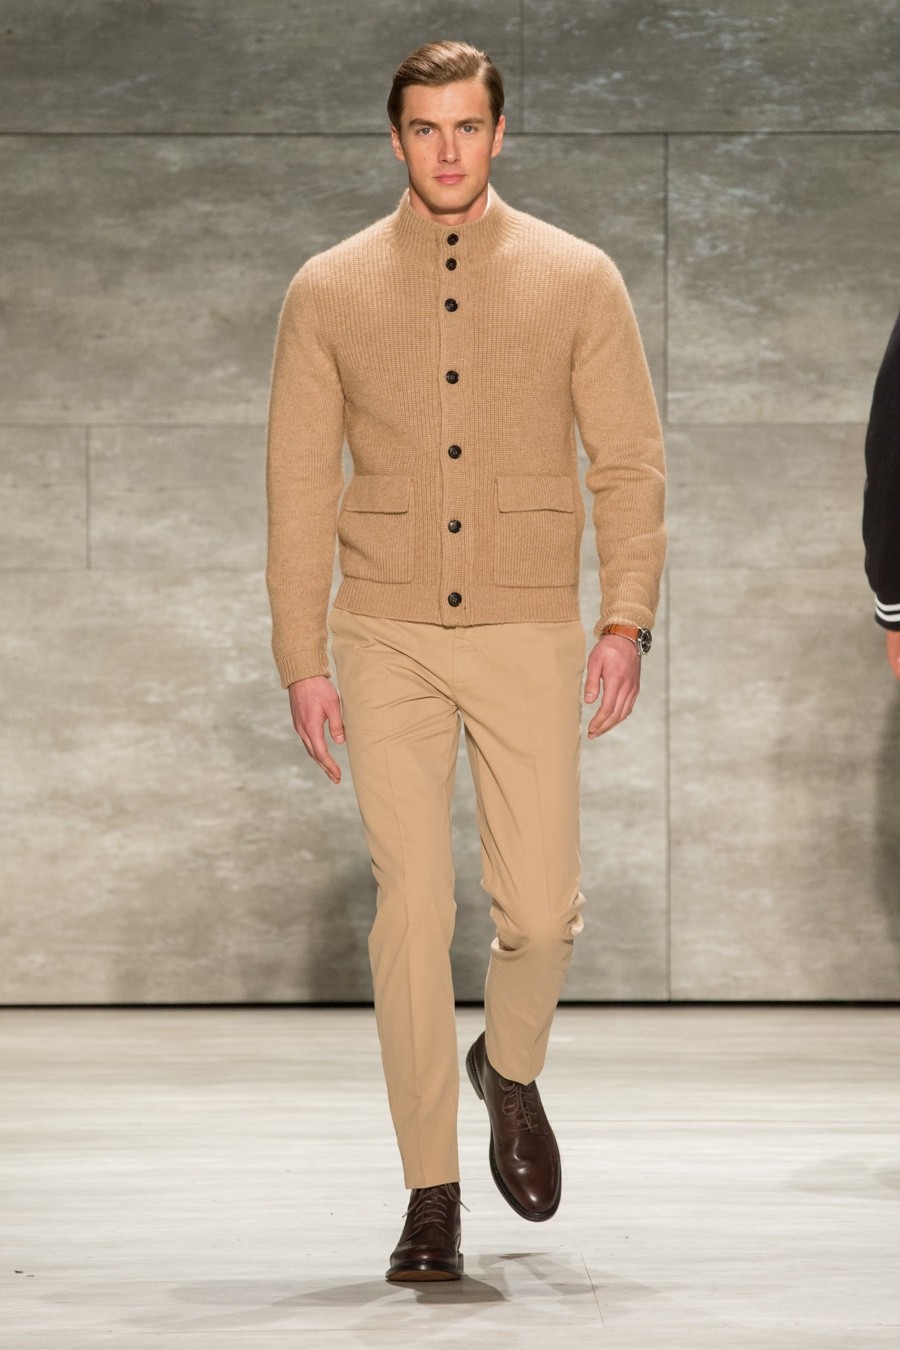 Todd Snyder Fall Winter 2015 Menswear Collection 013